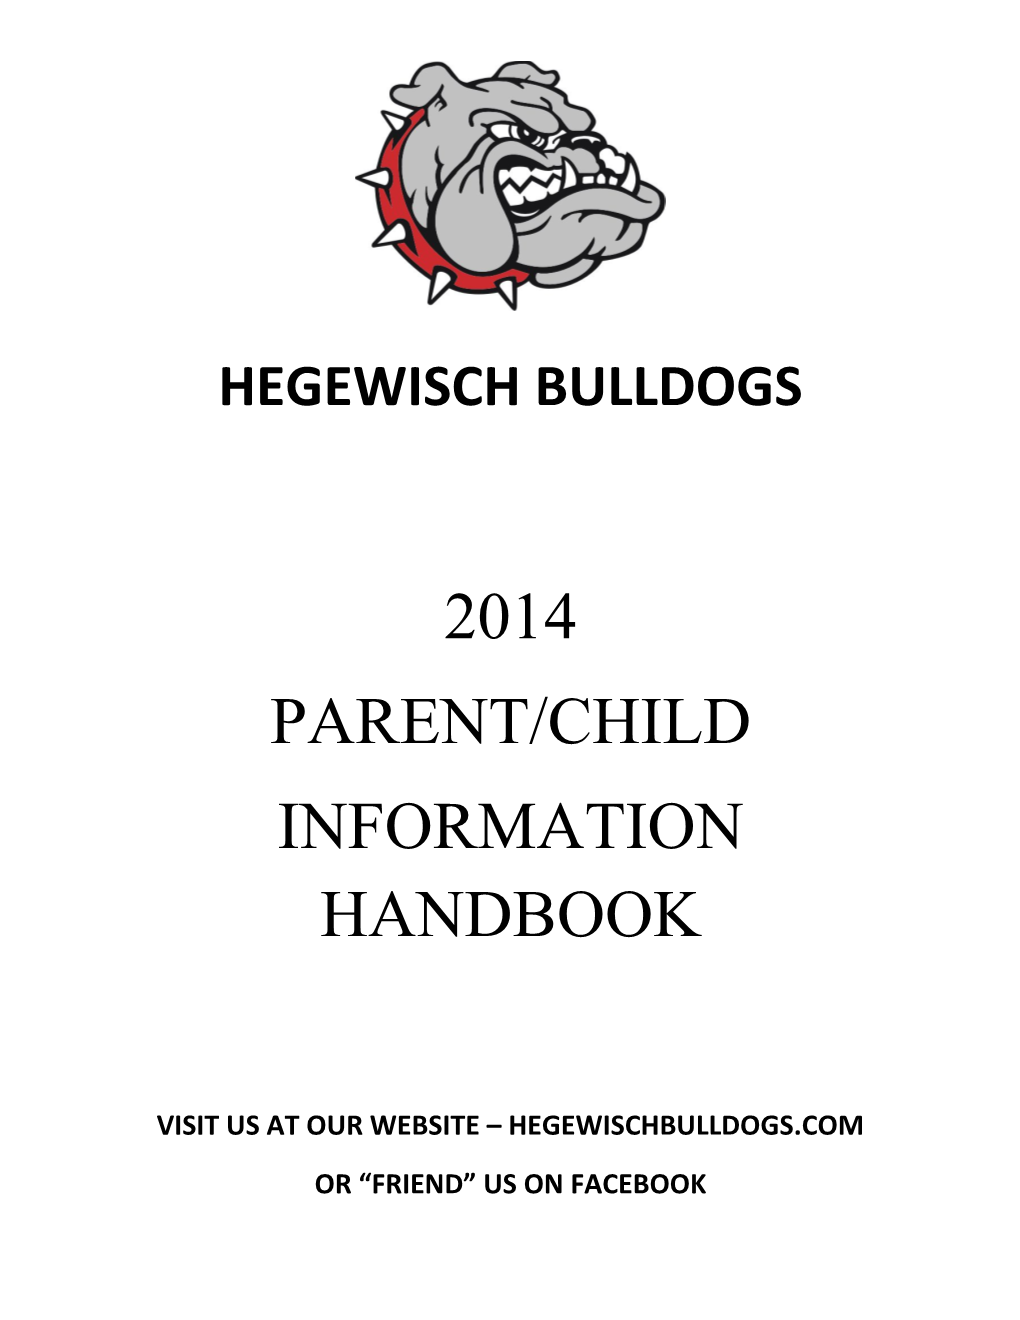 Visit Us at Our Website Hegewischbulldogs.Com